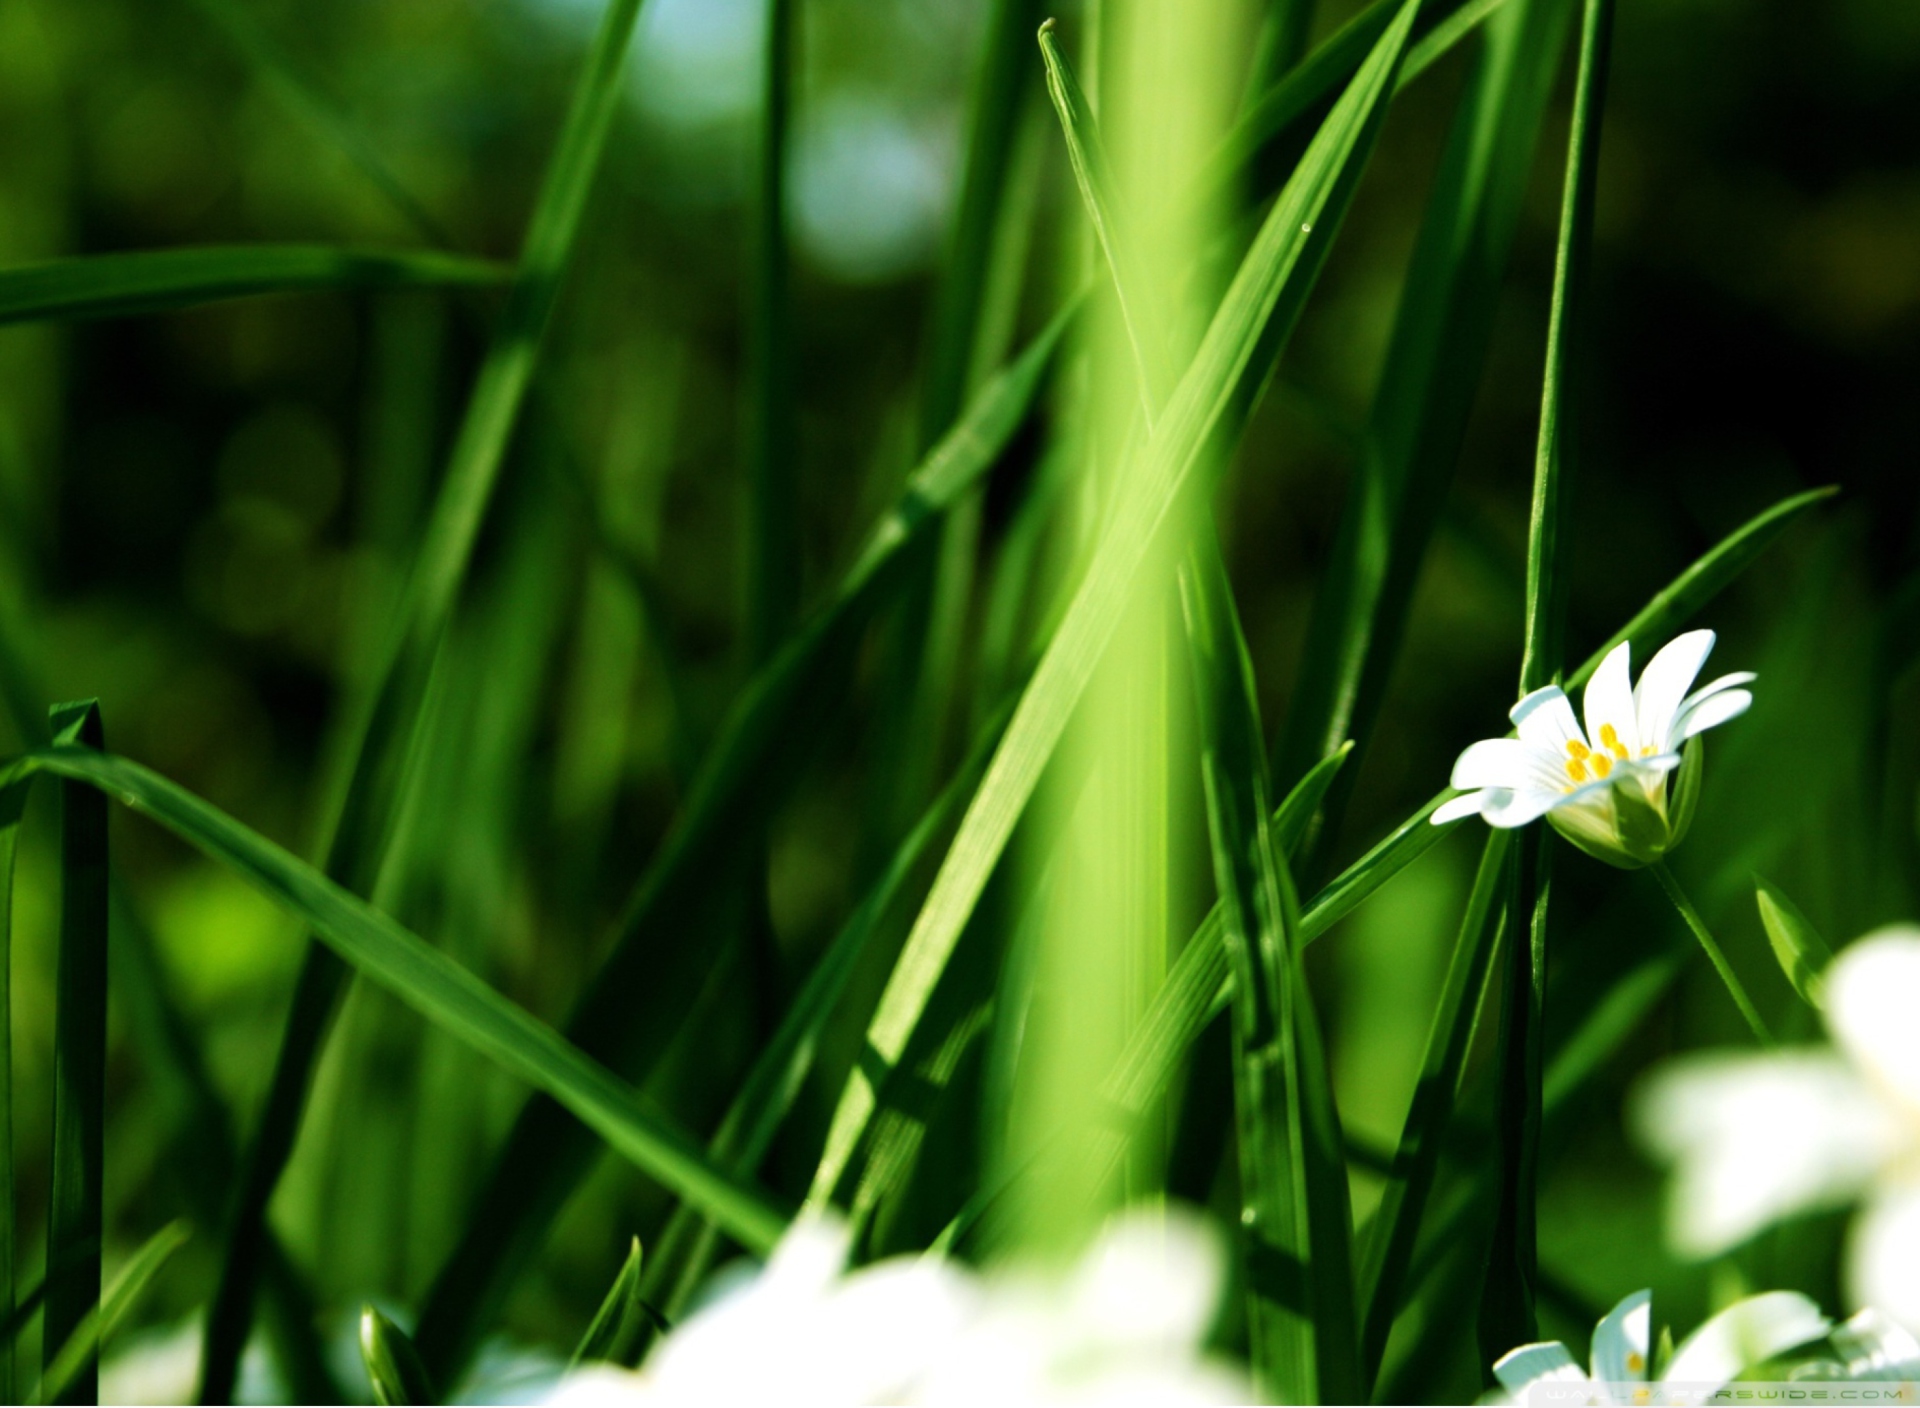 Grass And White Flowers wallpaper 1920x1408